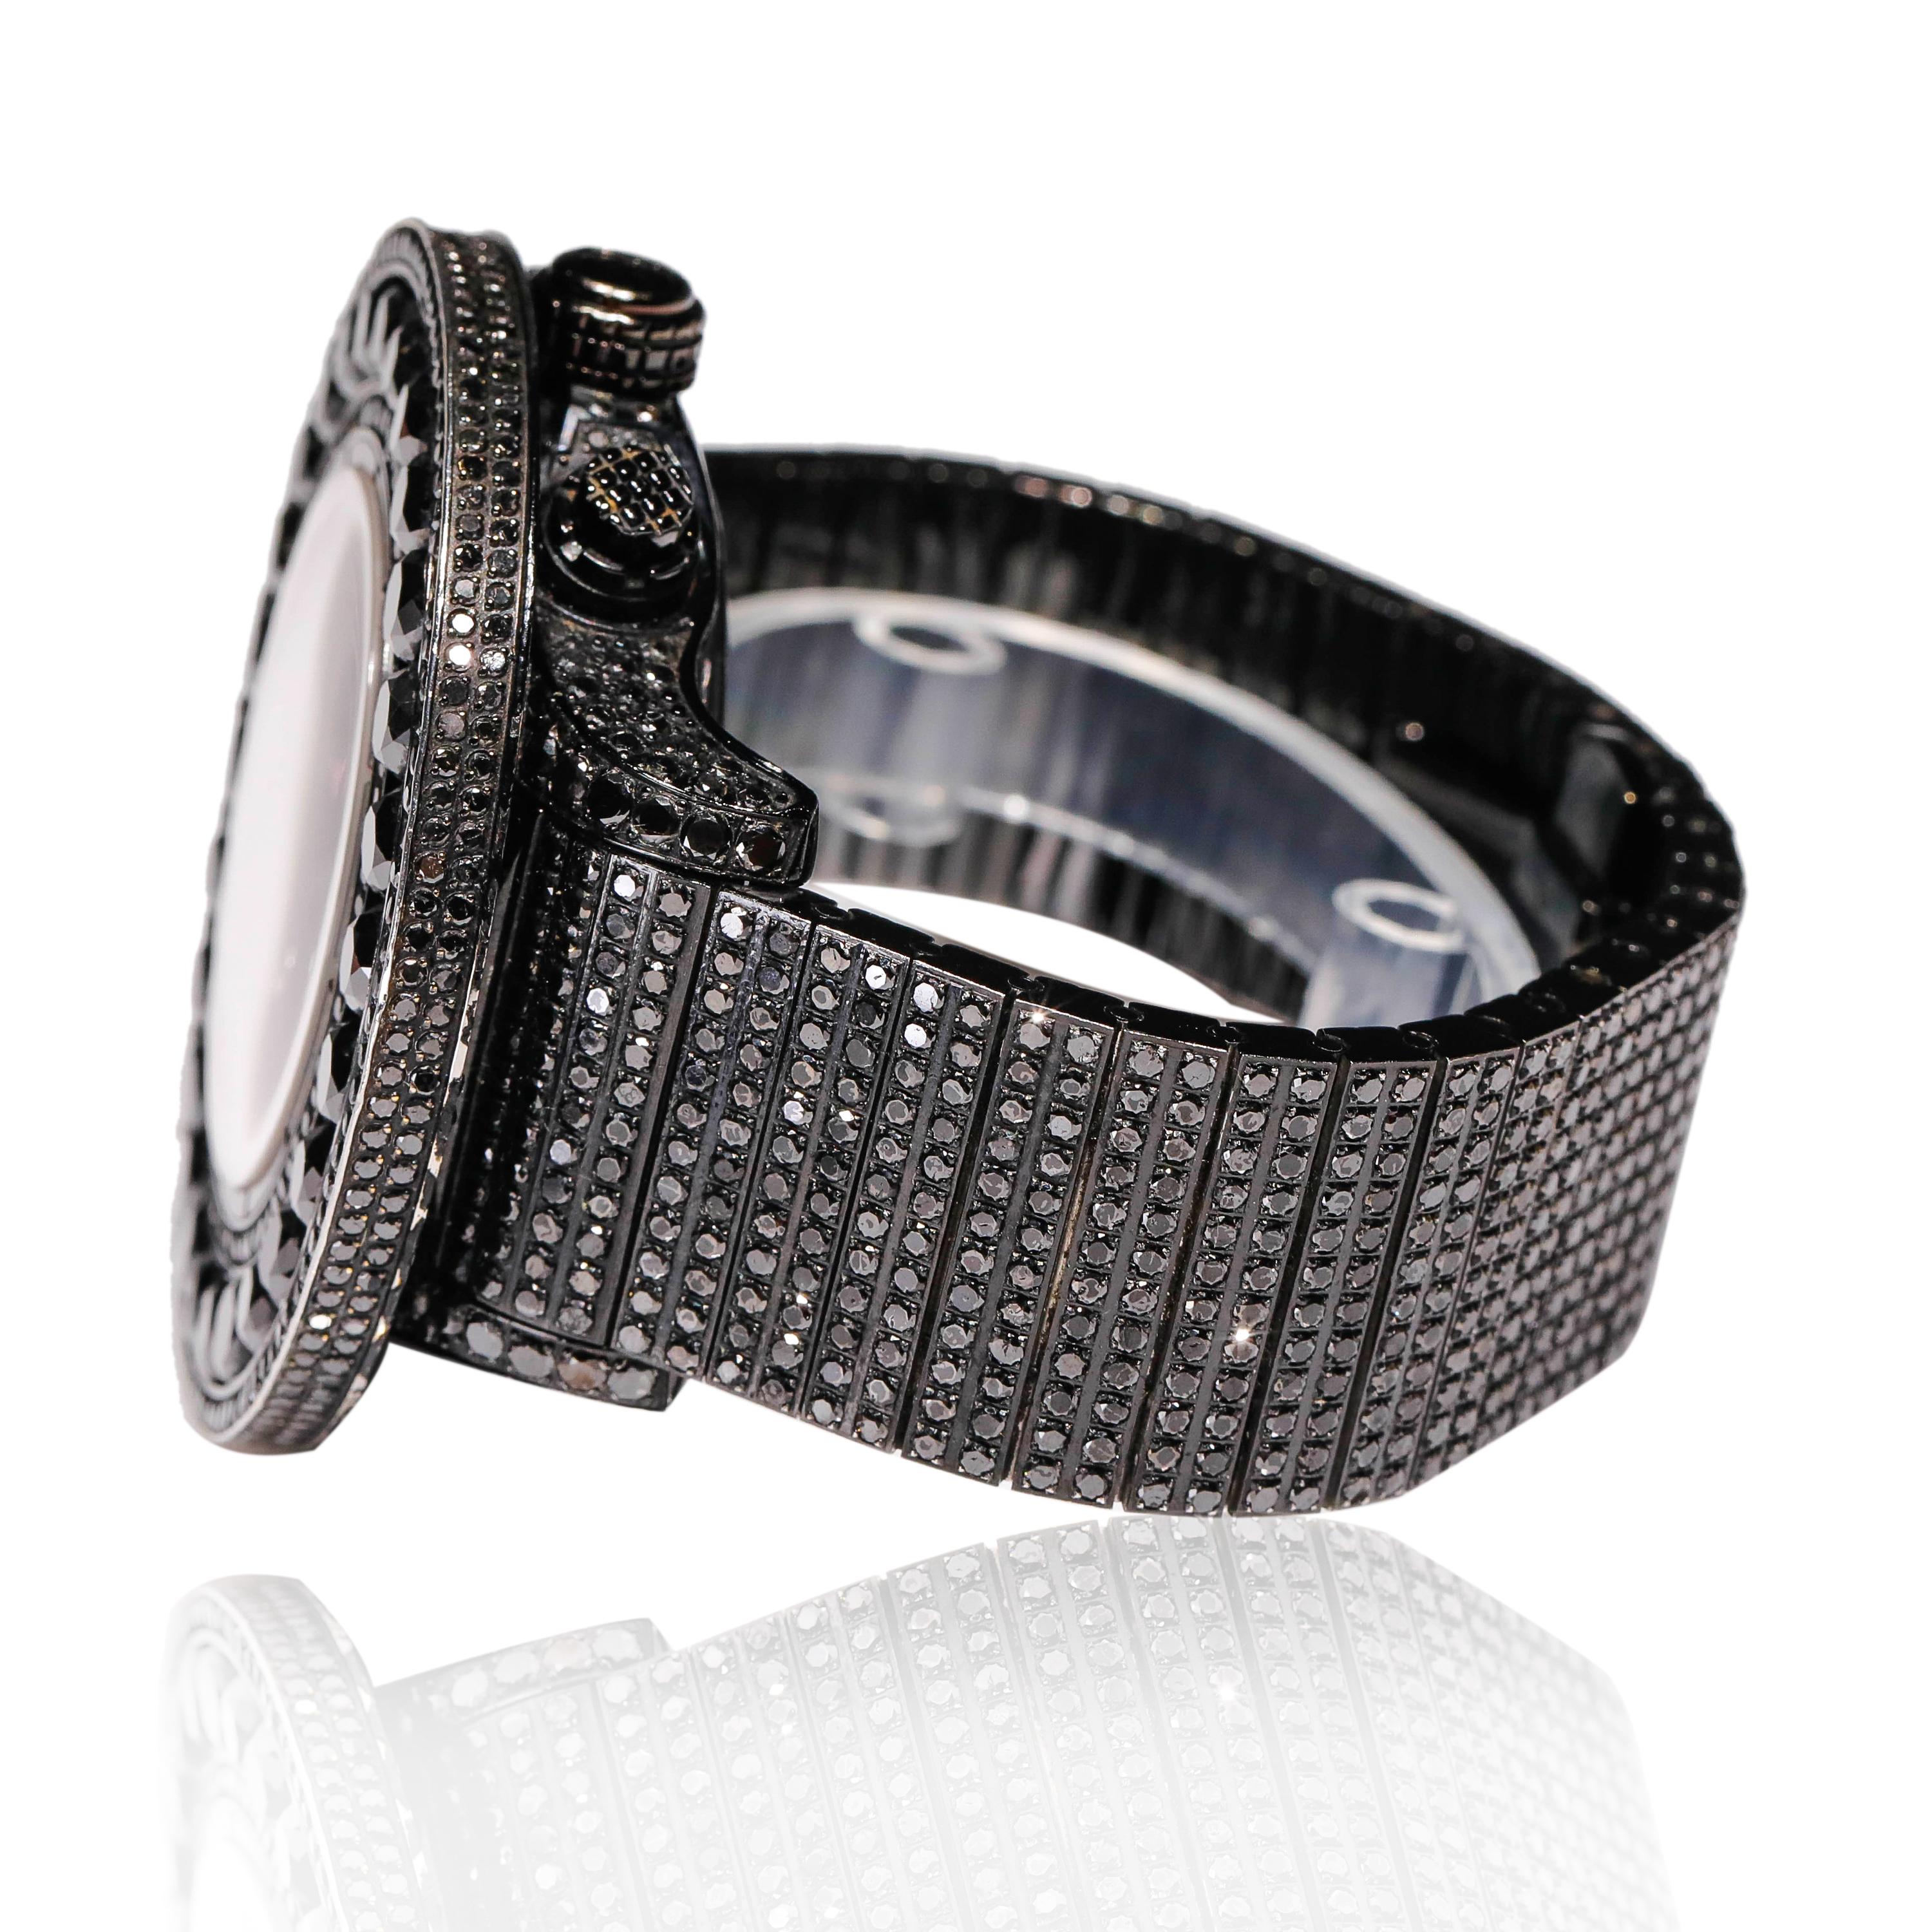 Stainless Steel Custom 90 Ct Black Diamond Dial Breitling Automatic Watch

SKU: WA00031

PRIMARY DETAILS
Brand:  Breitling
Model: Stainless Steel Custom 90 Ct Black Diamond Dial Breitling 
Country of Origin: NA
Movement Type: Automatic
Year of